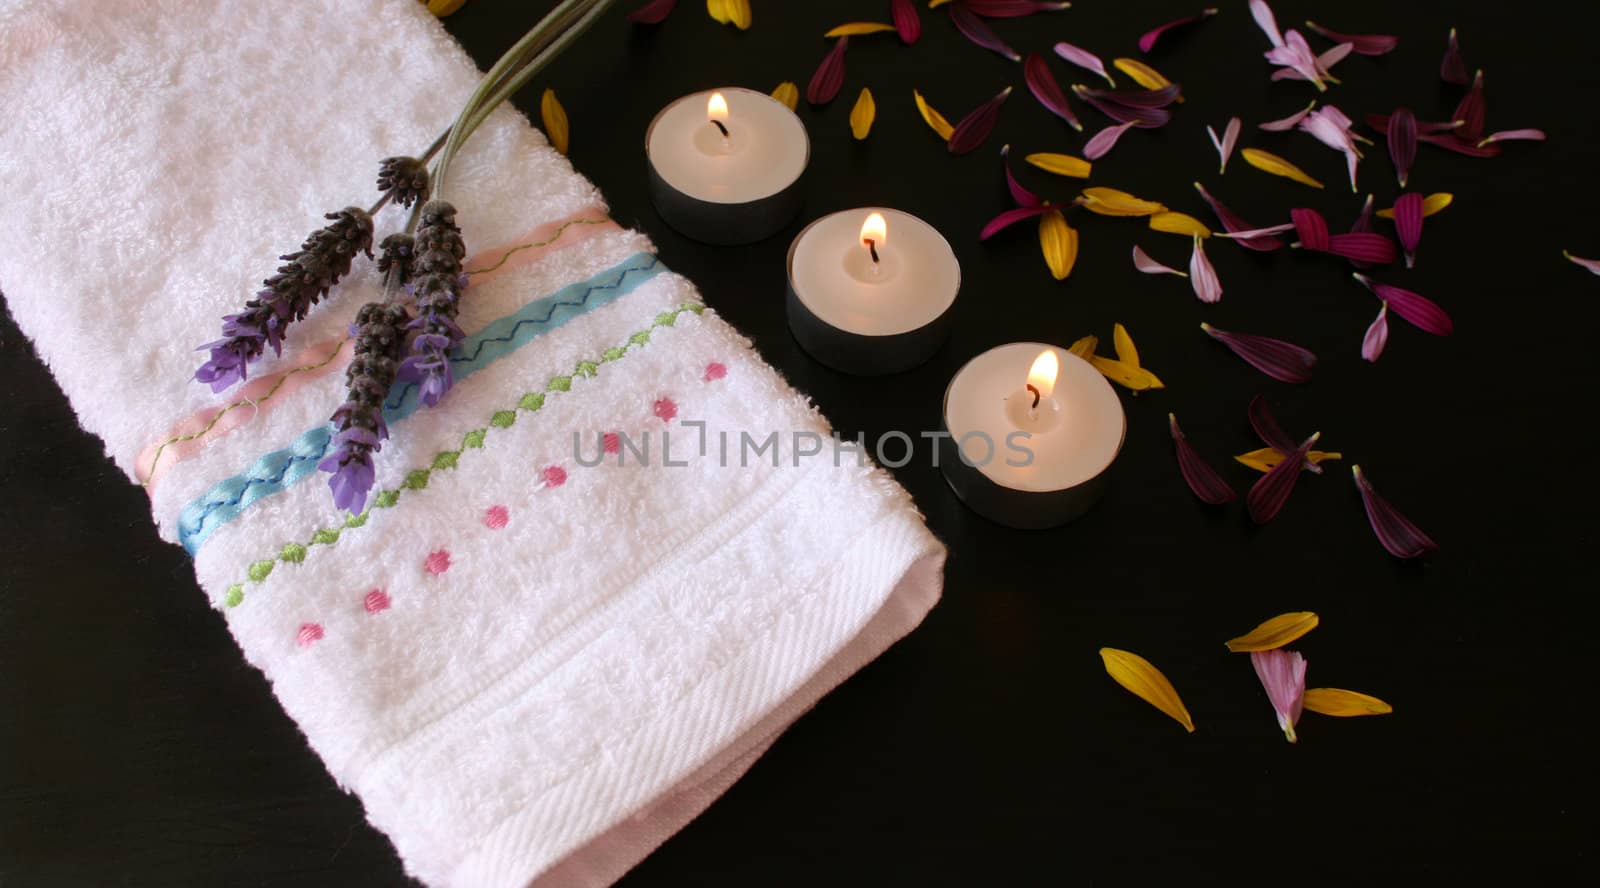 Candles and petals on a brown surface next to a hand towel
